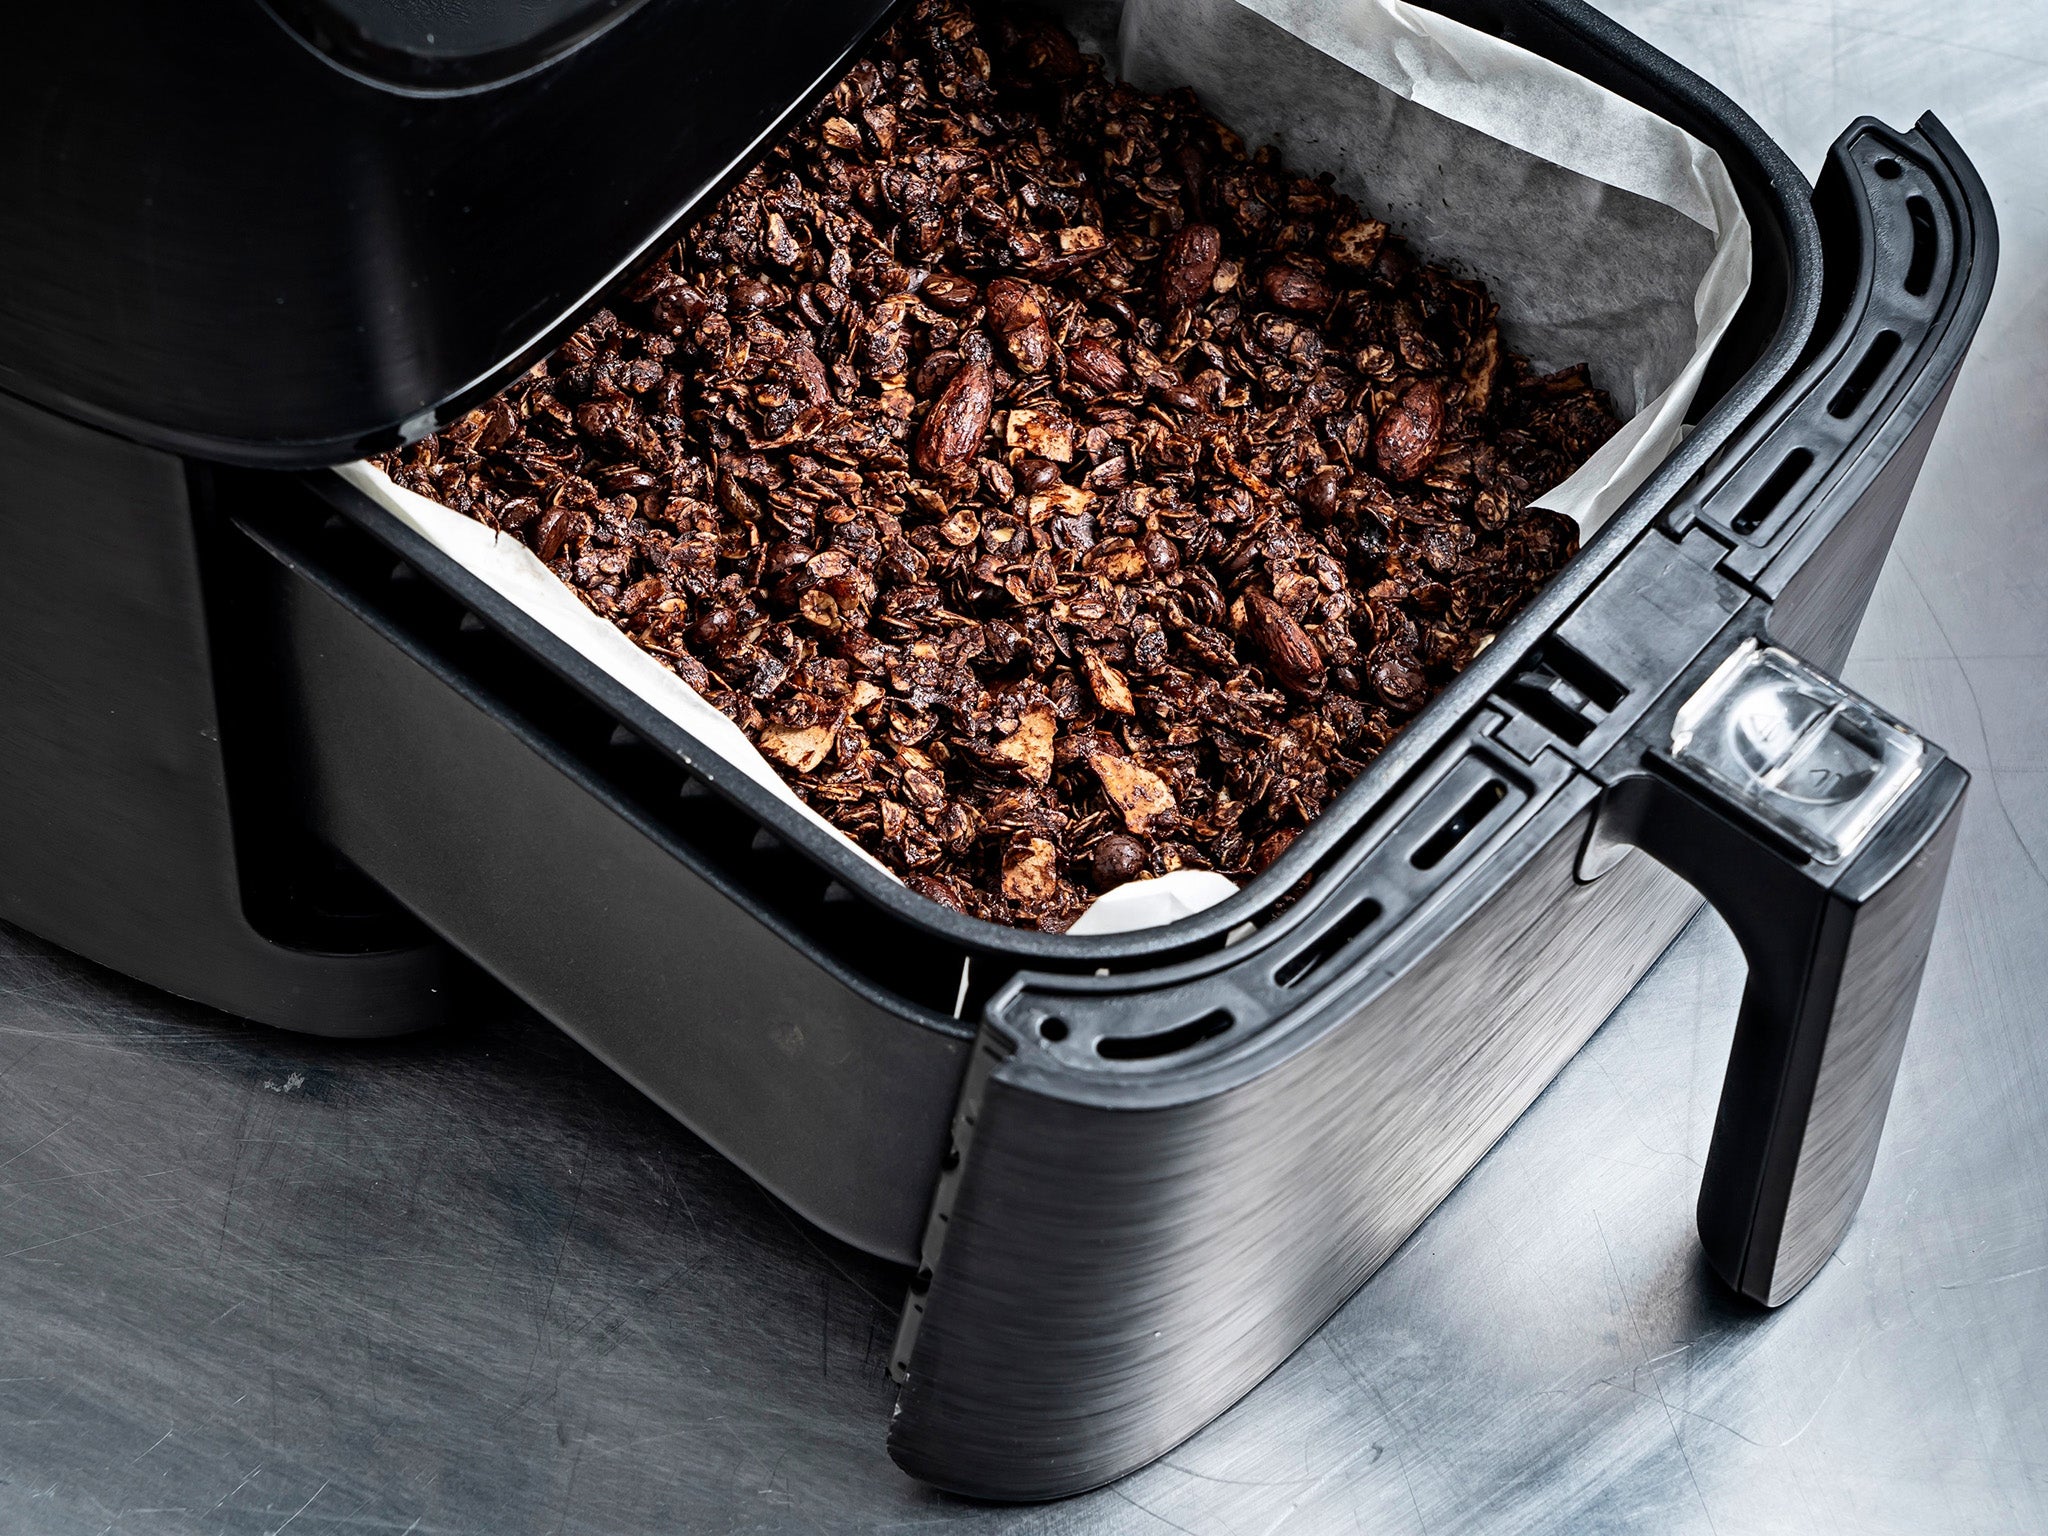 Make granola in the air fryer and turn out morsels that exceed even my crunchiest dreams